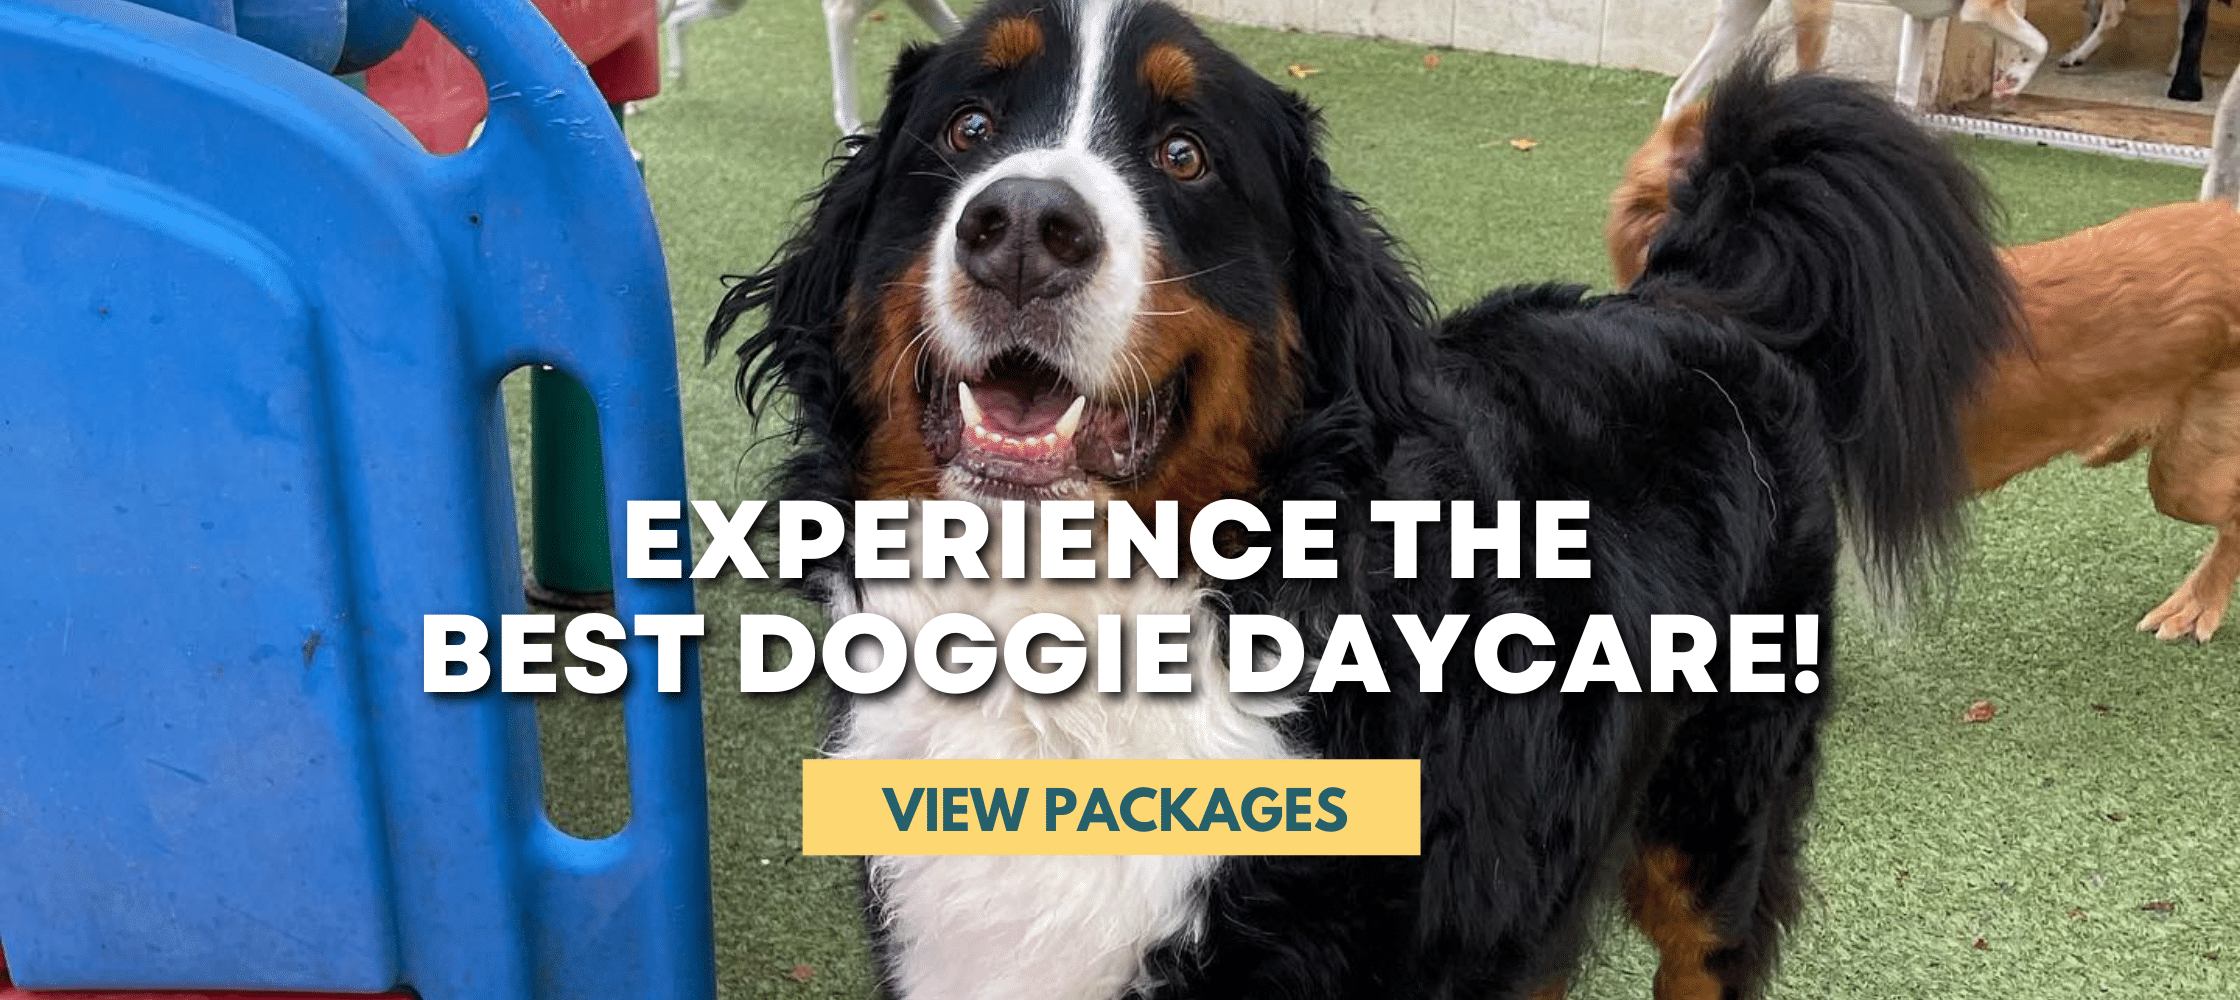 The Best Doggie Daycare